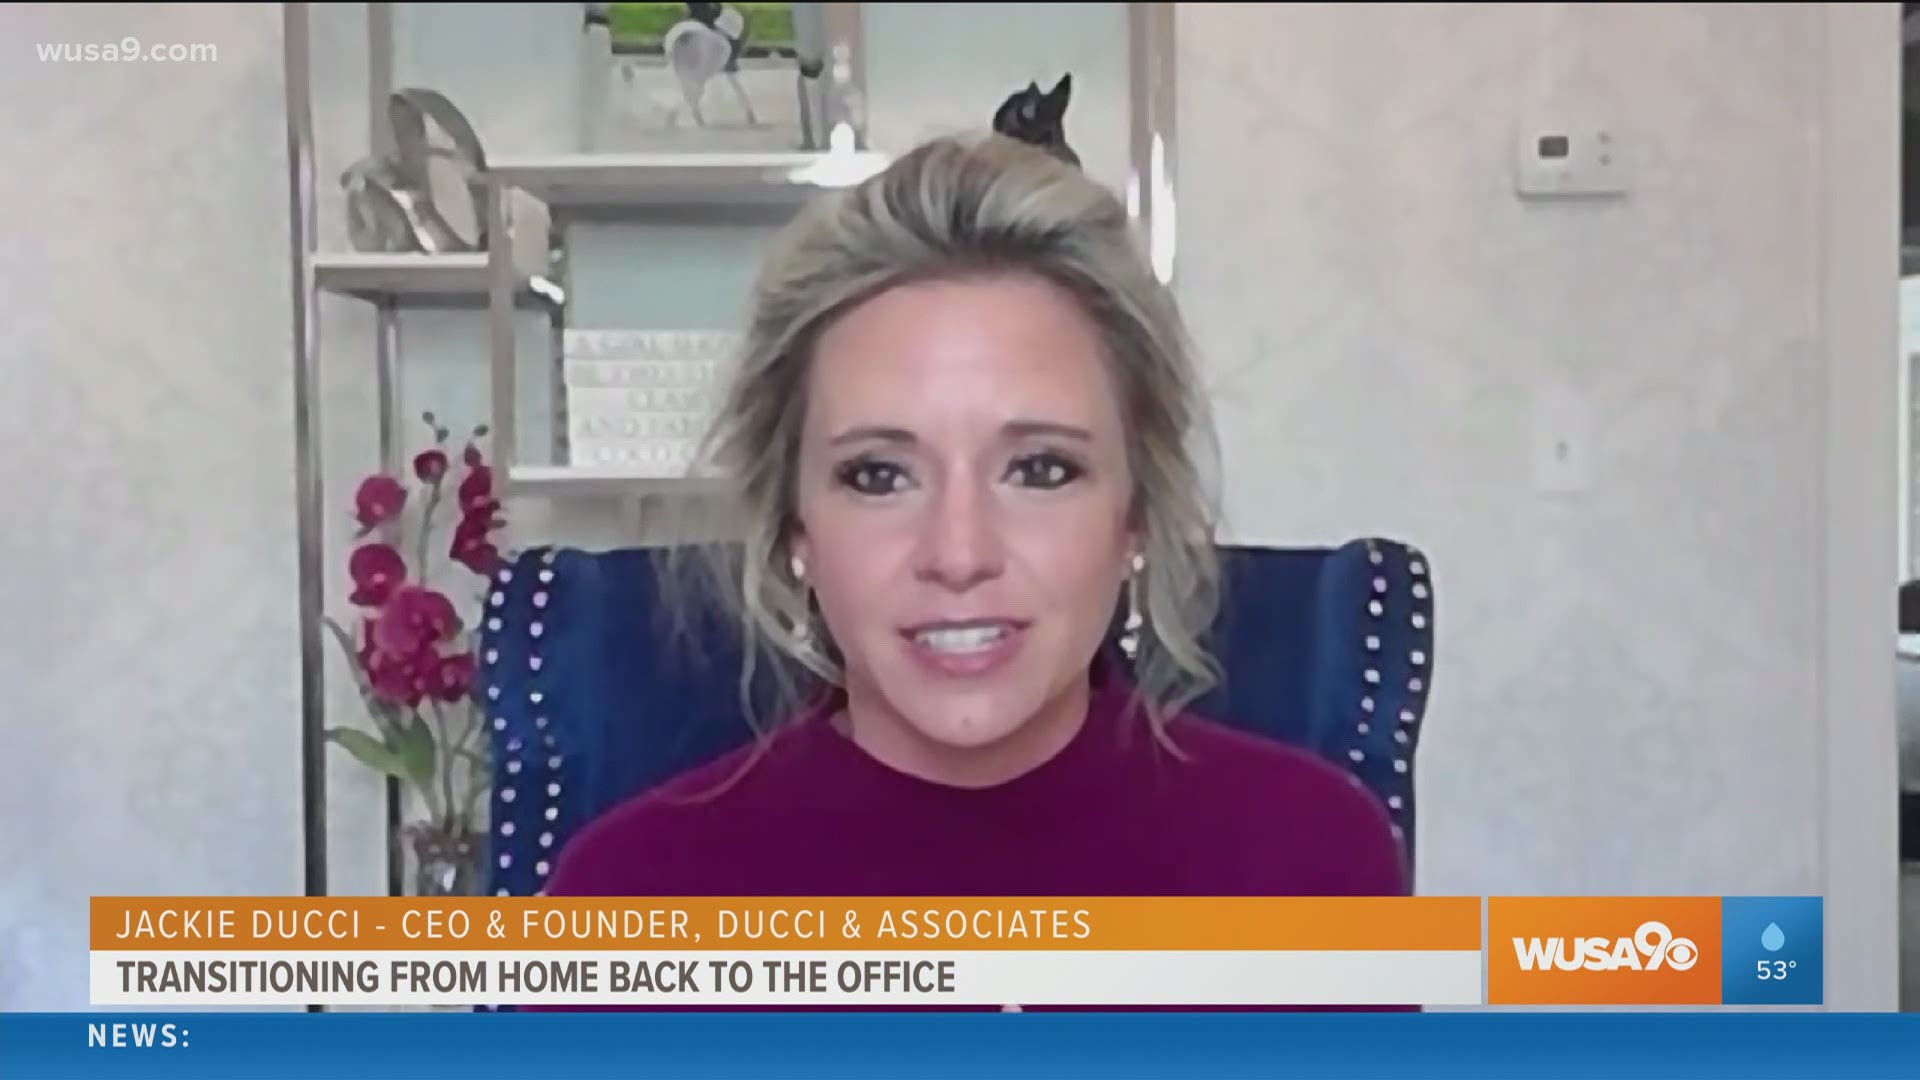 Many people are headed back to the workplace for the first time in over a year. Jackie Ducci, CEO and Founder of Ducci & Associates has advice for a smooth return.